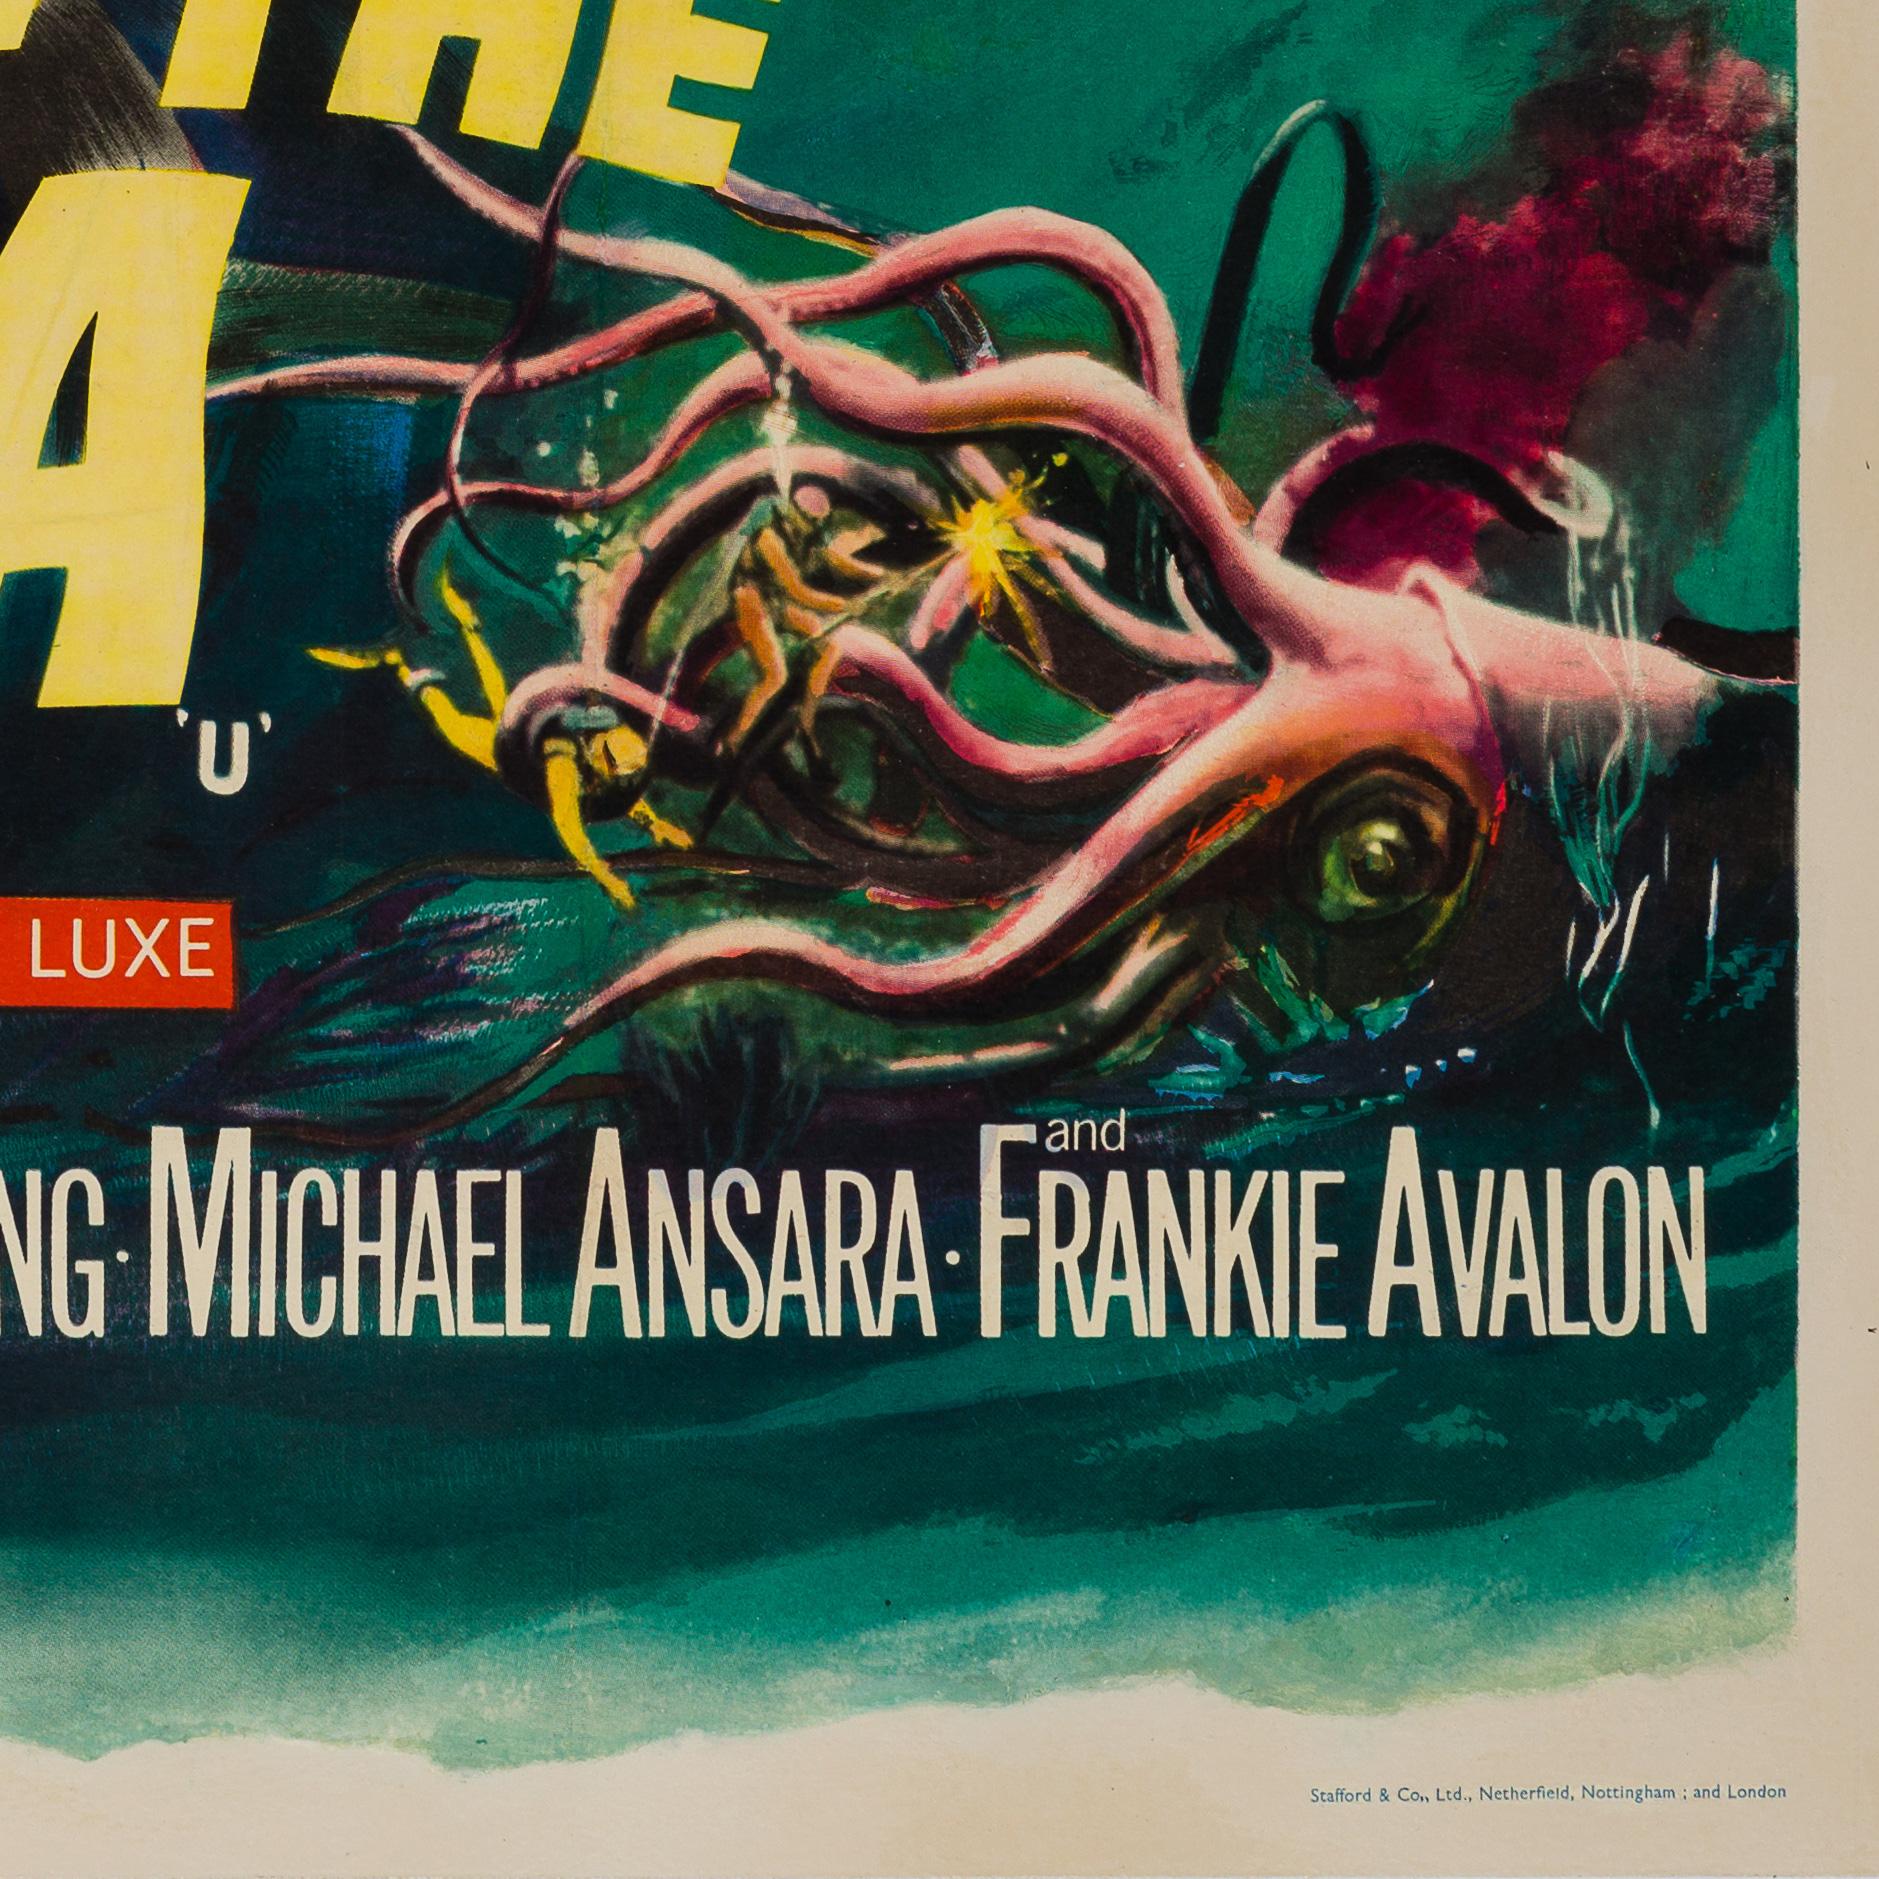 We love the colorful and dramatic artwork by Tom Chantrell for 1960s sci-fi classic Voyage to the Bottom of the Sea. A scare and wonderful poster.

Professionally cleaned, de-acidified and linen-backed. Poster is sized 30 x 40 inches (31 x 41